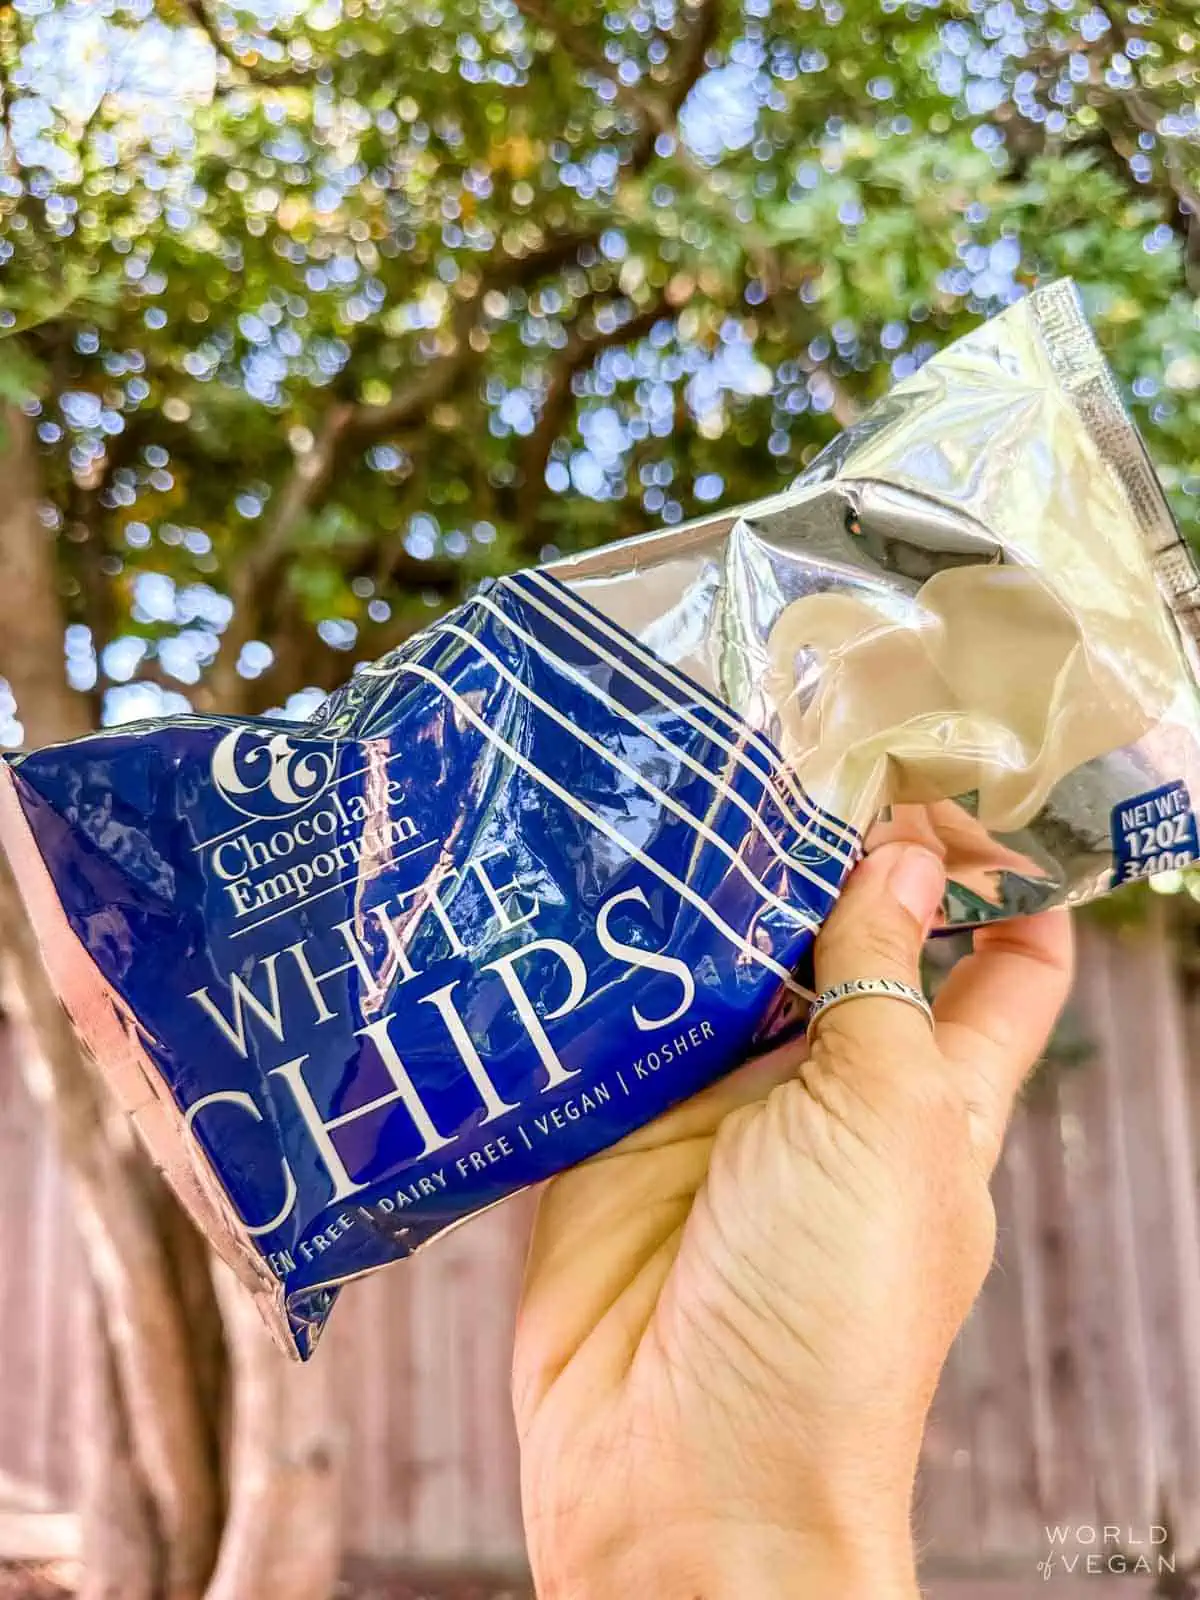 A hand holding up a bag of Chocolate Emporium's dairy-free white chocolate chips.